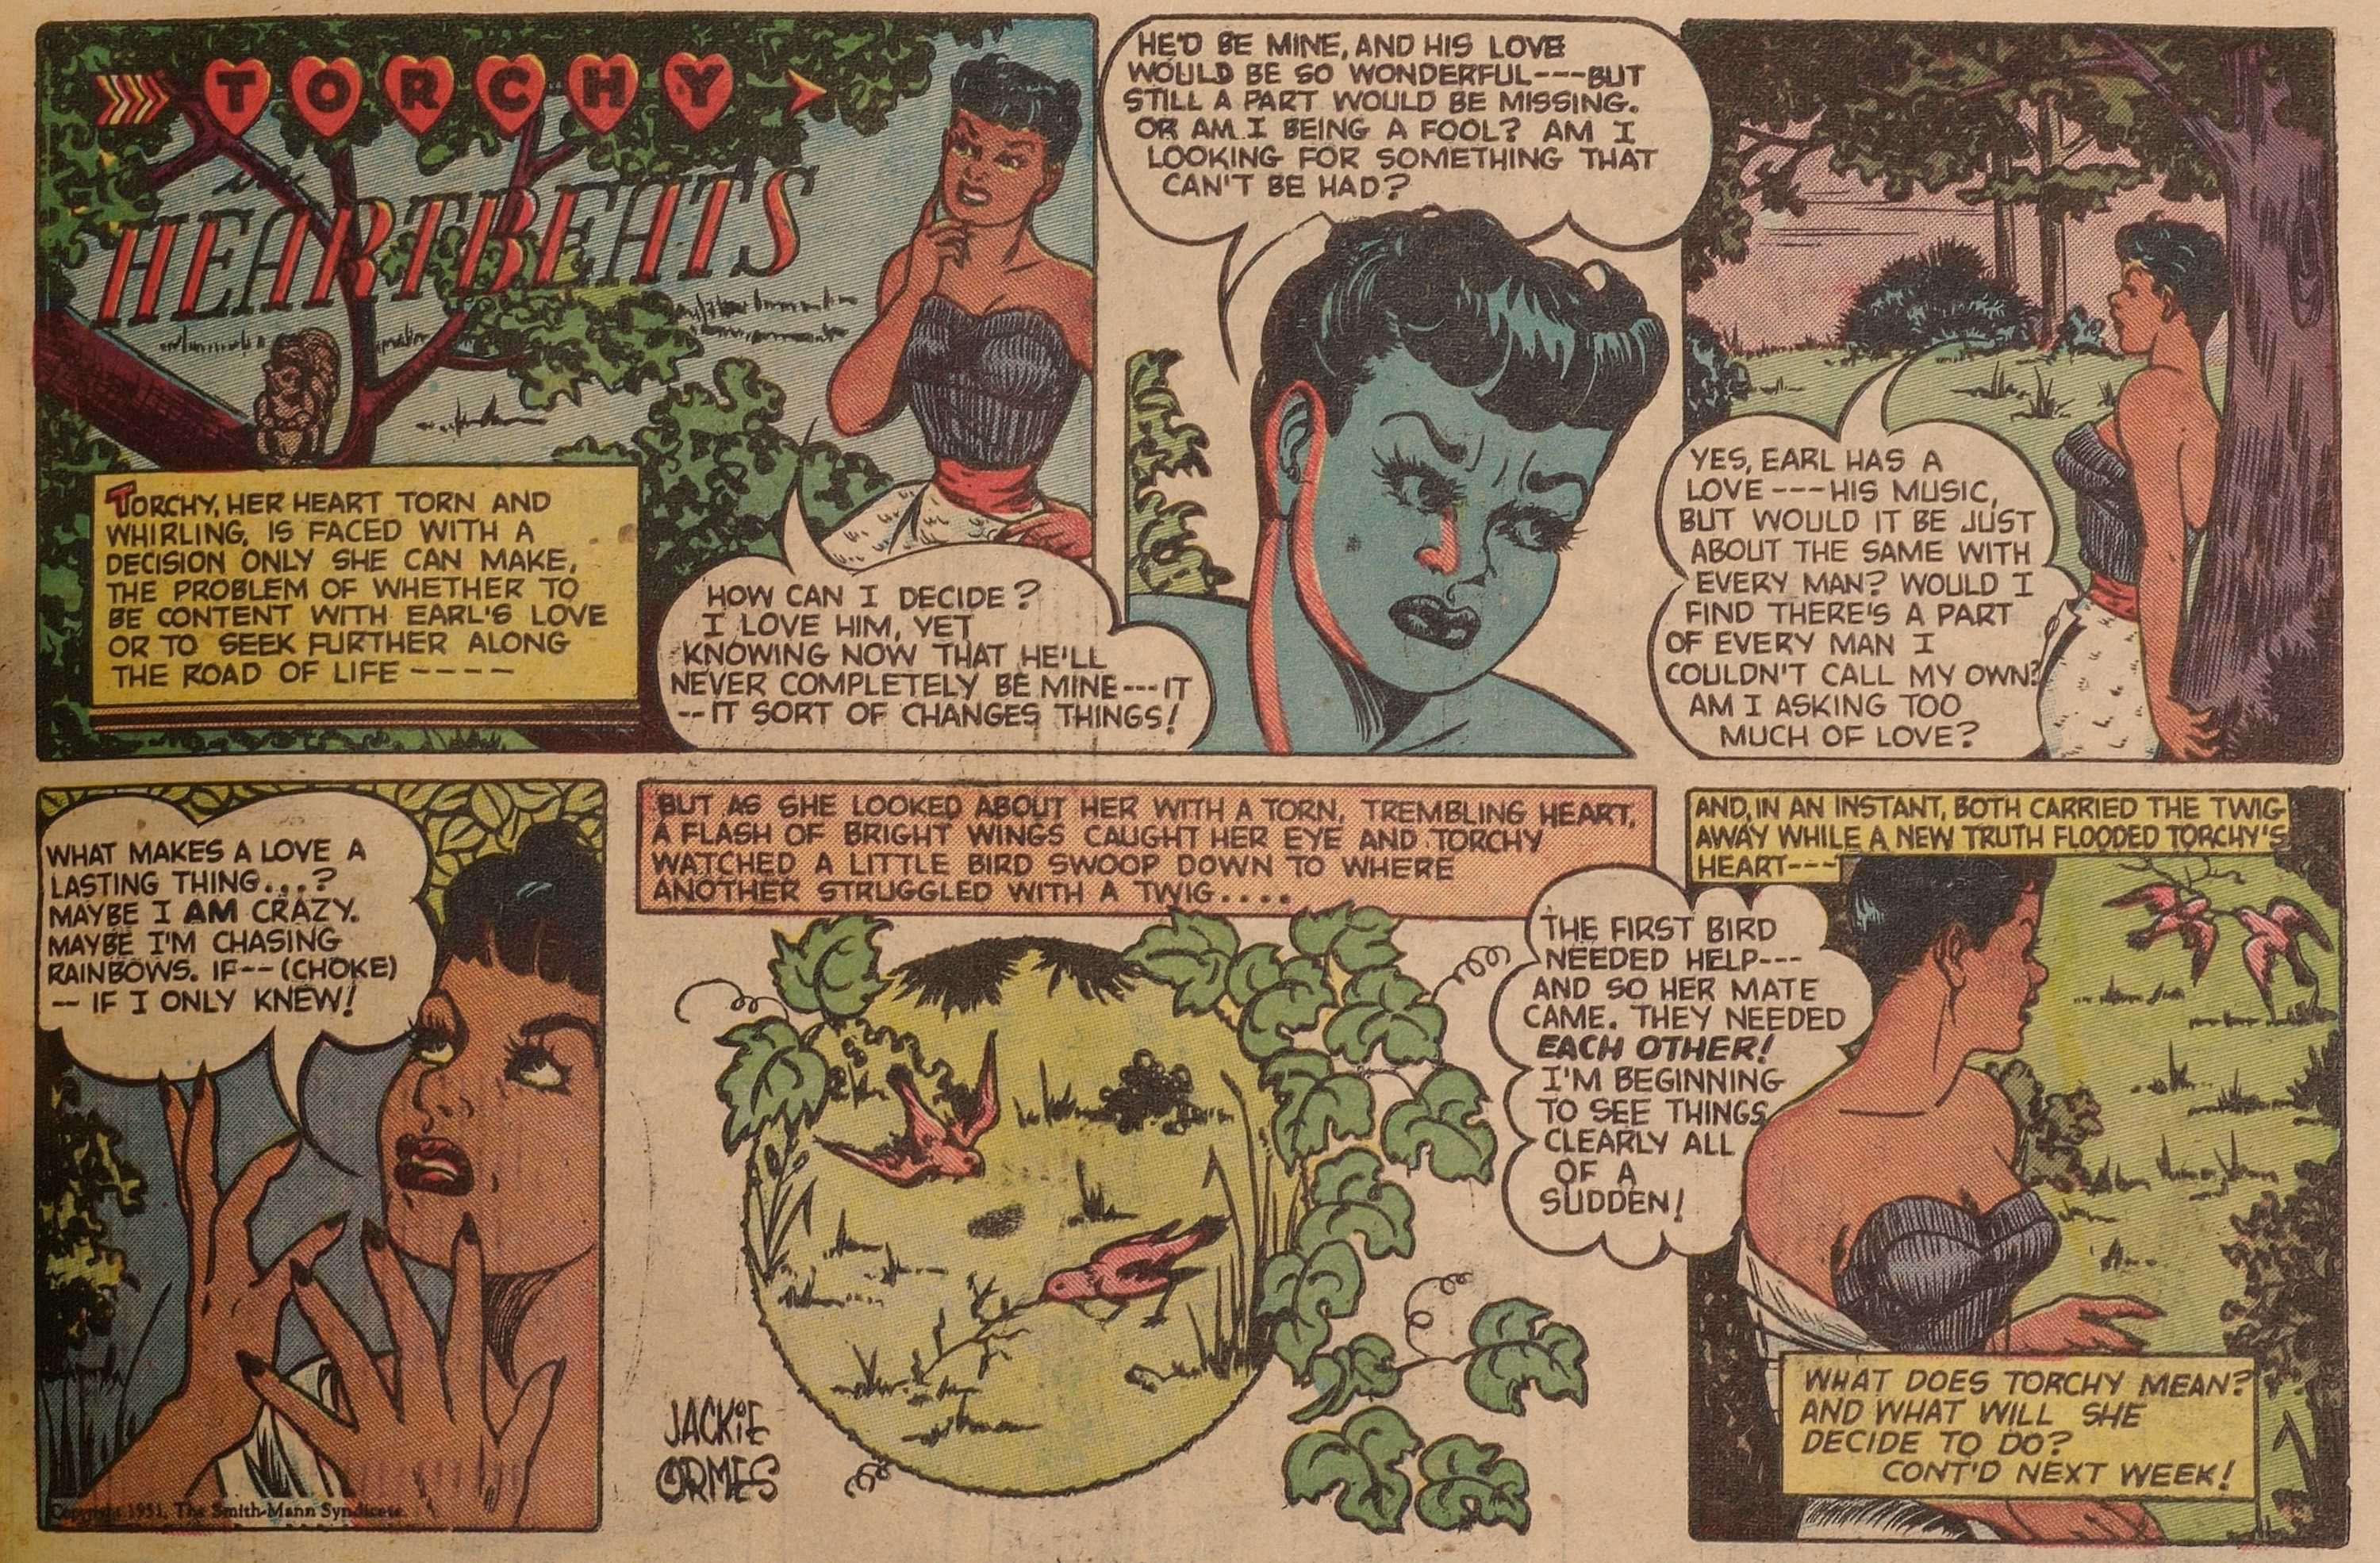 A colored comic strip with 6 panels of Torchy Brown contemplating if she should be with a certain man.